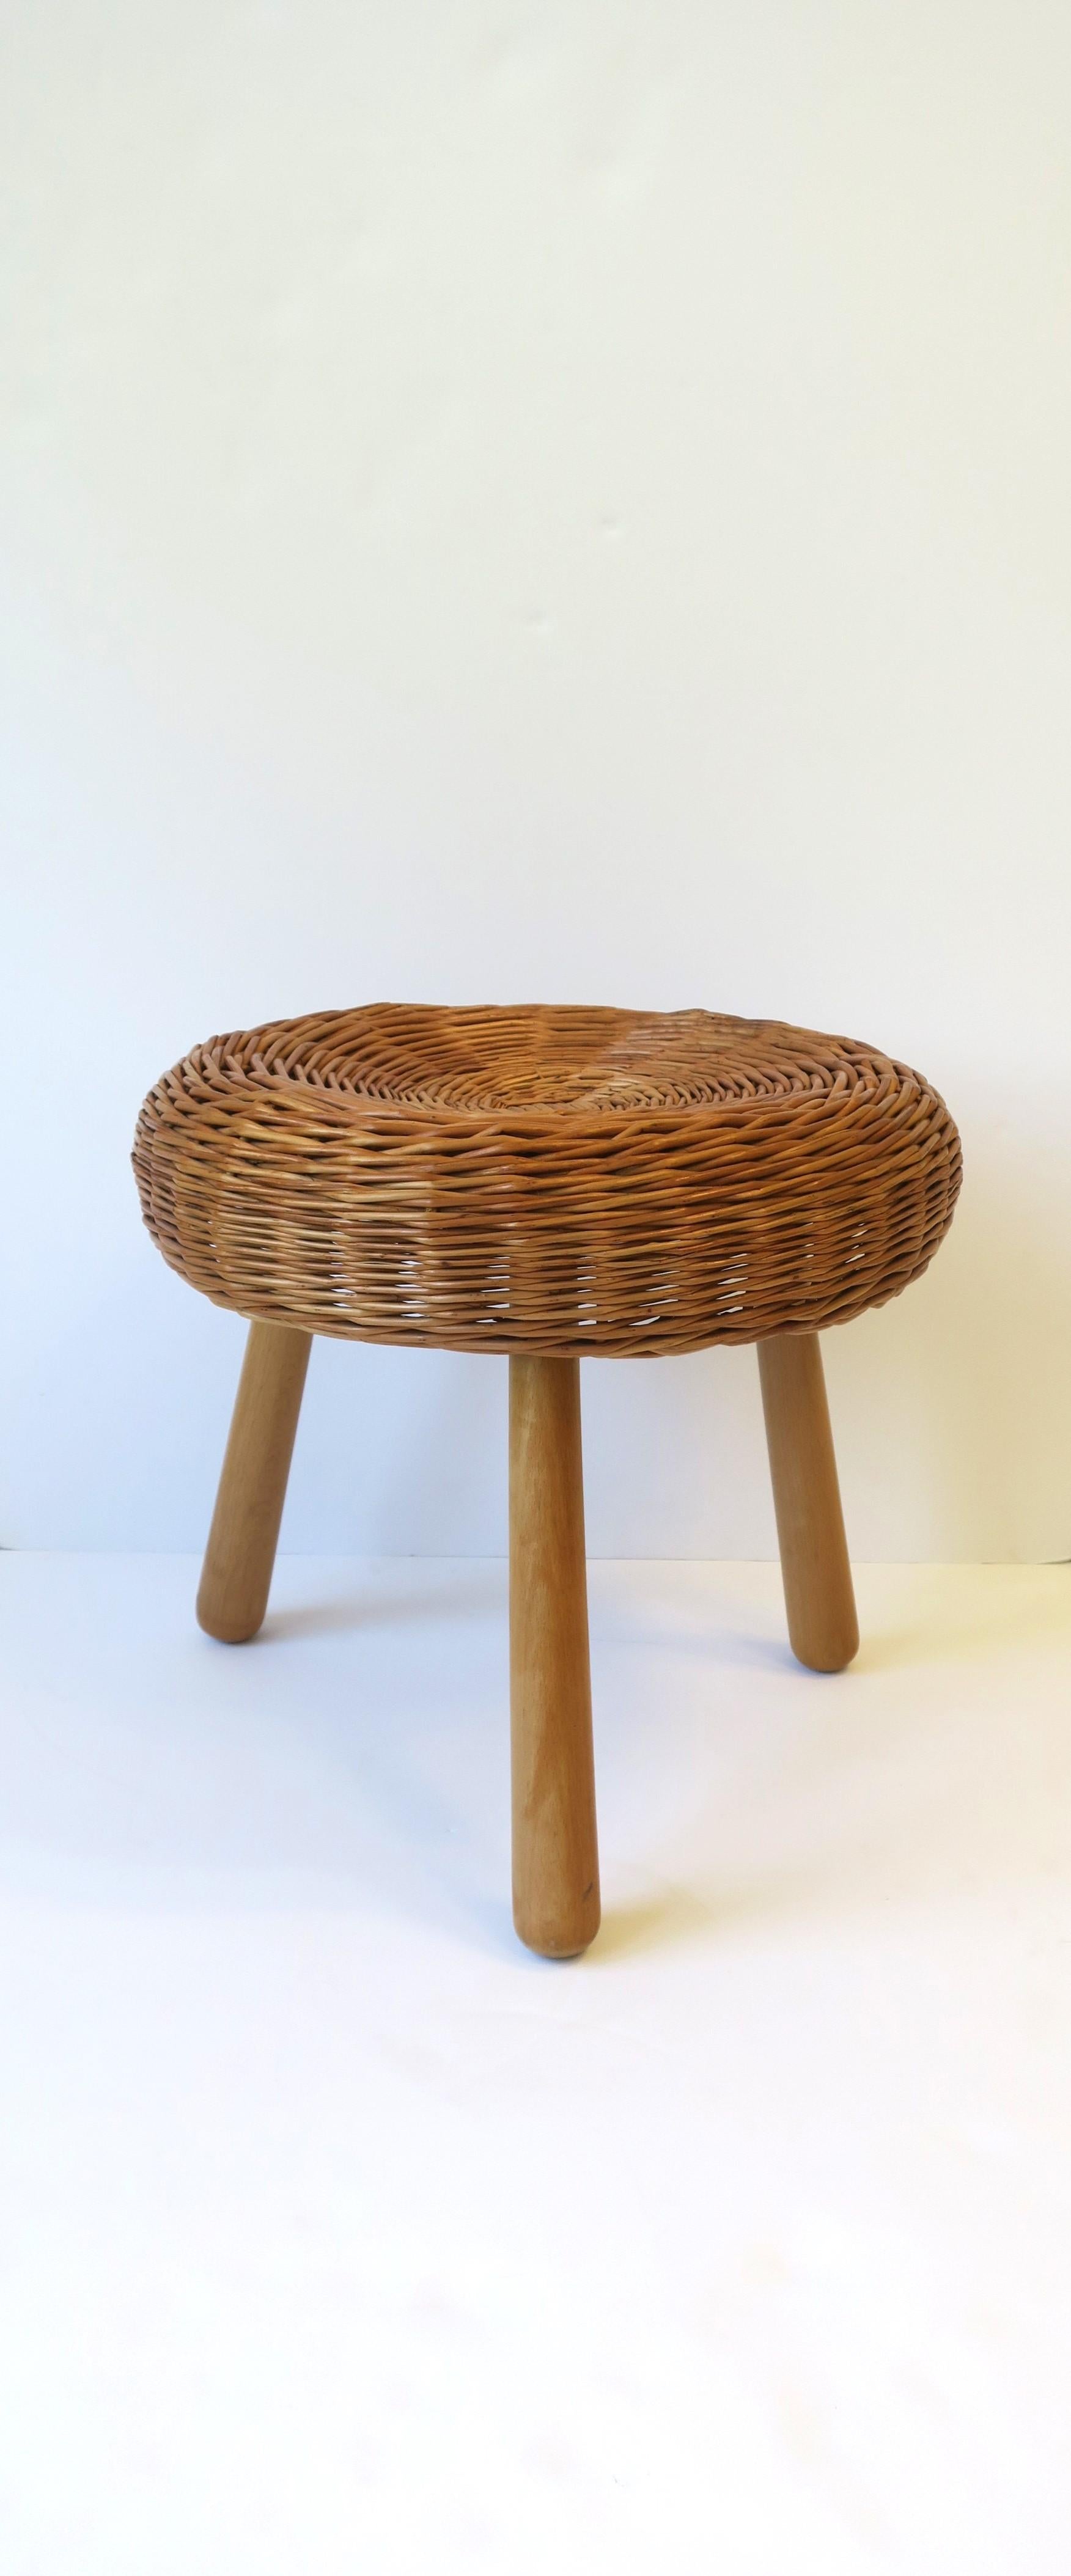 A European wicker 'tri-pod' stool, Midcentury Modern period, circa mid-20th century, Yugoslavia. A beautiful stool, footstool, or drinks table (providing there is a stable environment on top, e.g., tray, book, as demonstrated), plant stand, etc.